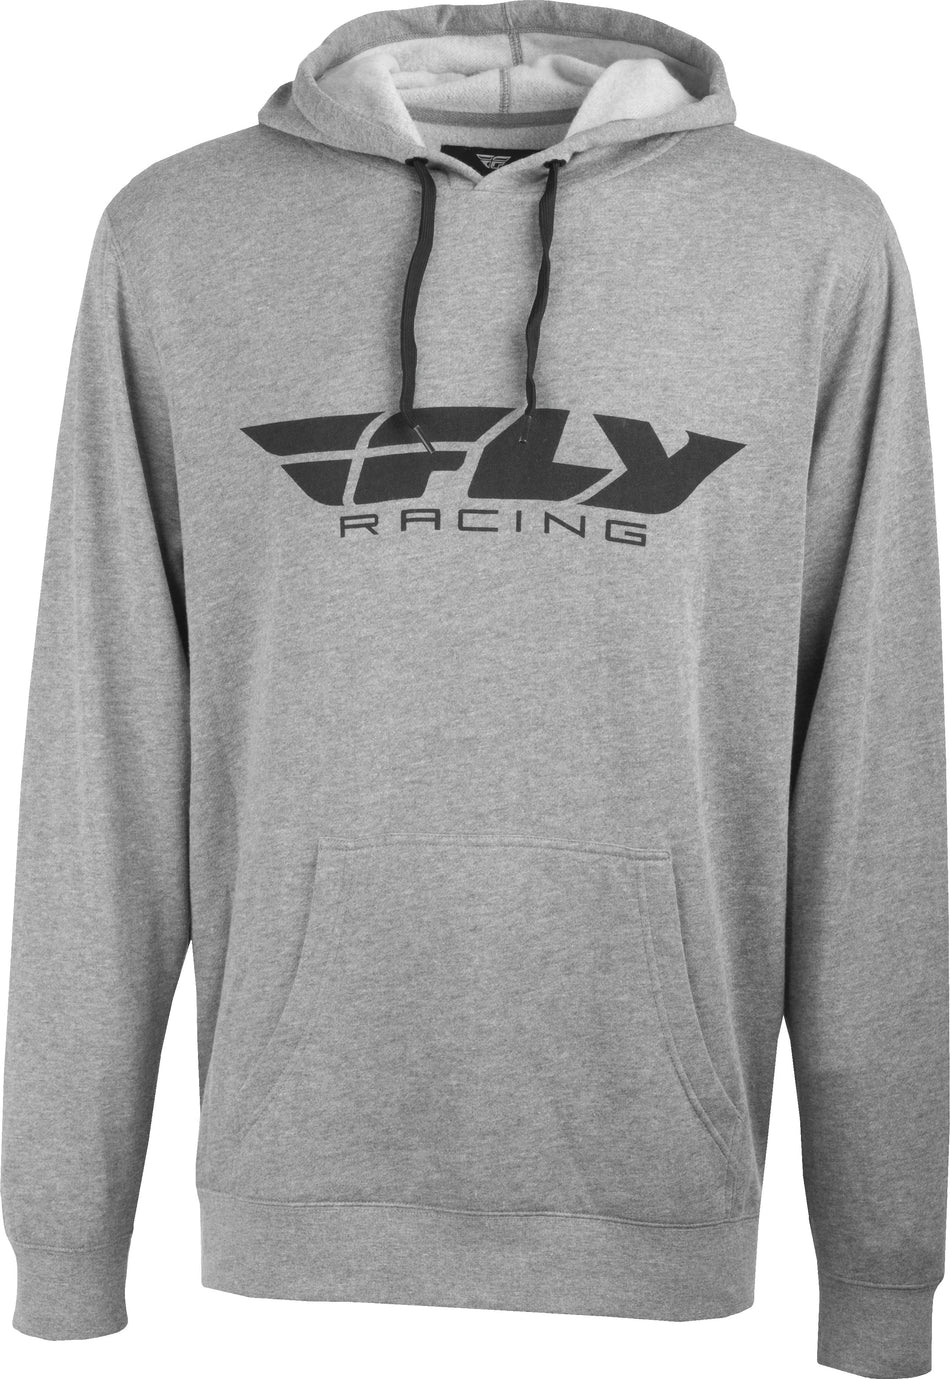 FLY RACING Fly Corporate Pullover Hoodie Grey Heather Lg 354-0036L